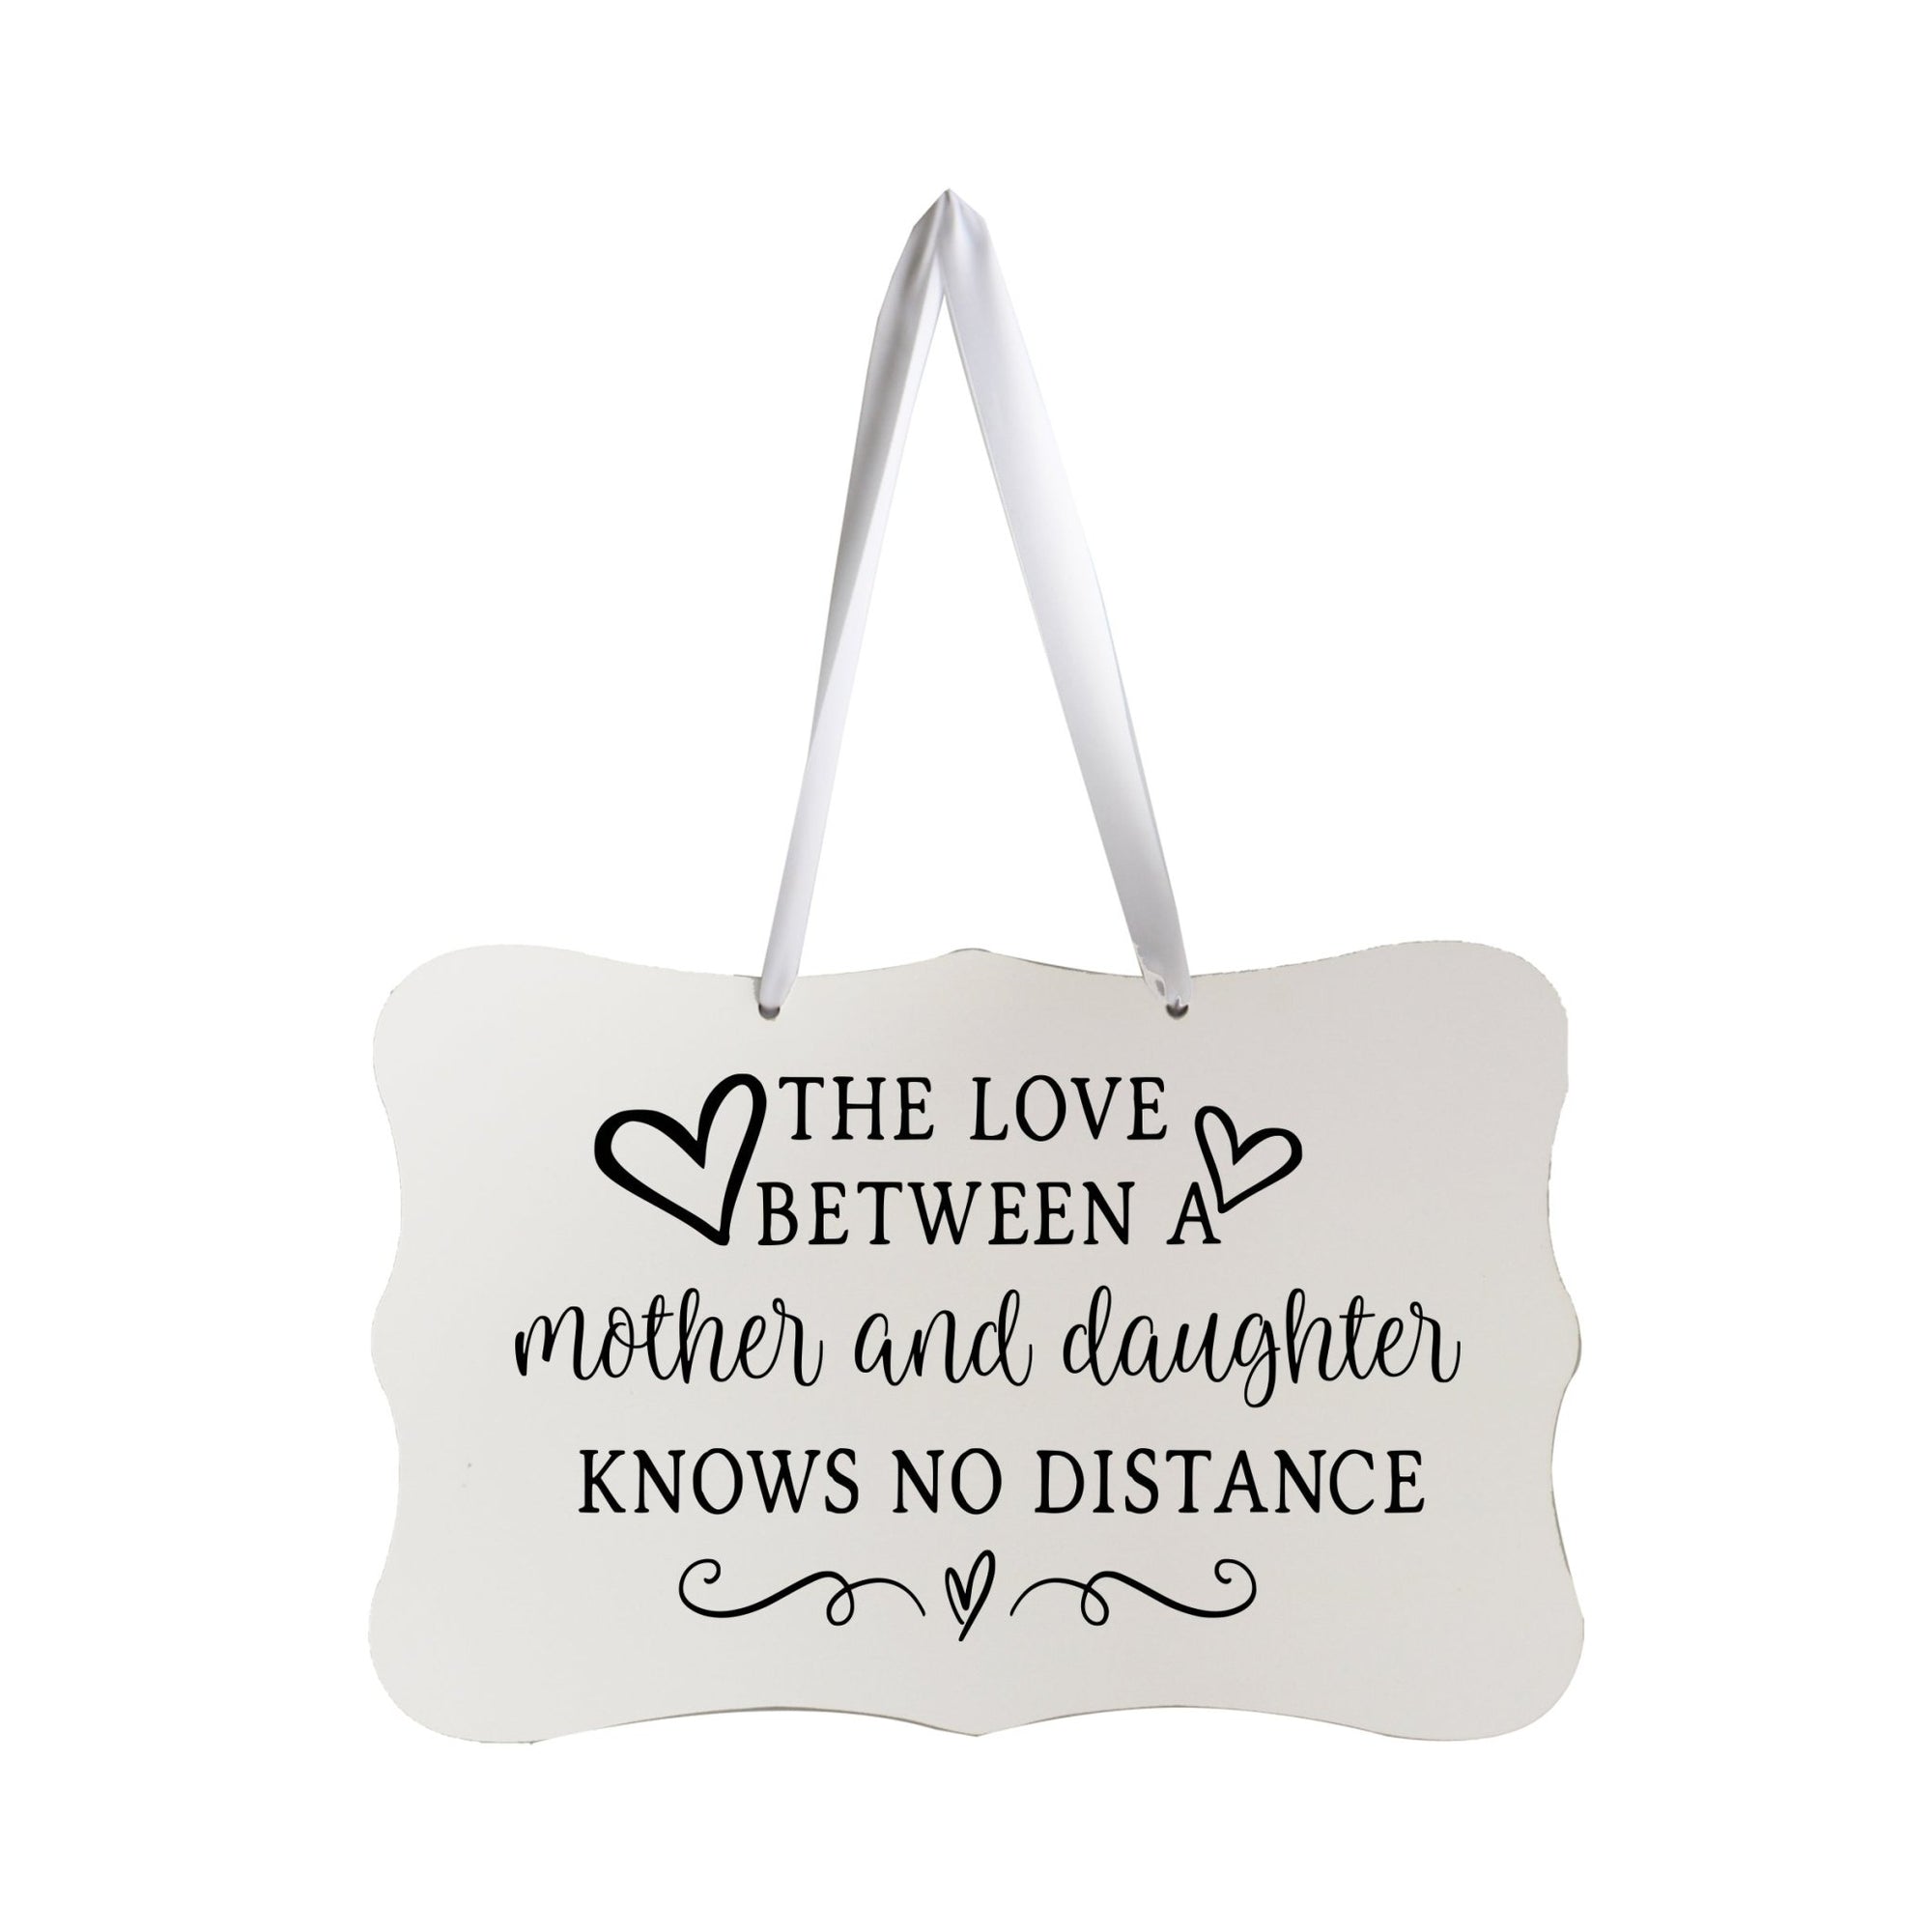 Modern Inspirational Wooden Wall Hanging Sign for Home Decorations 8x12 - The Love Between = Mother And Daughter - LifeSong Milestones